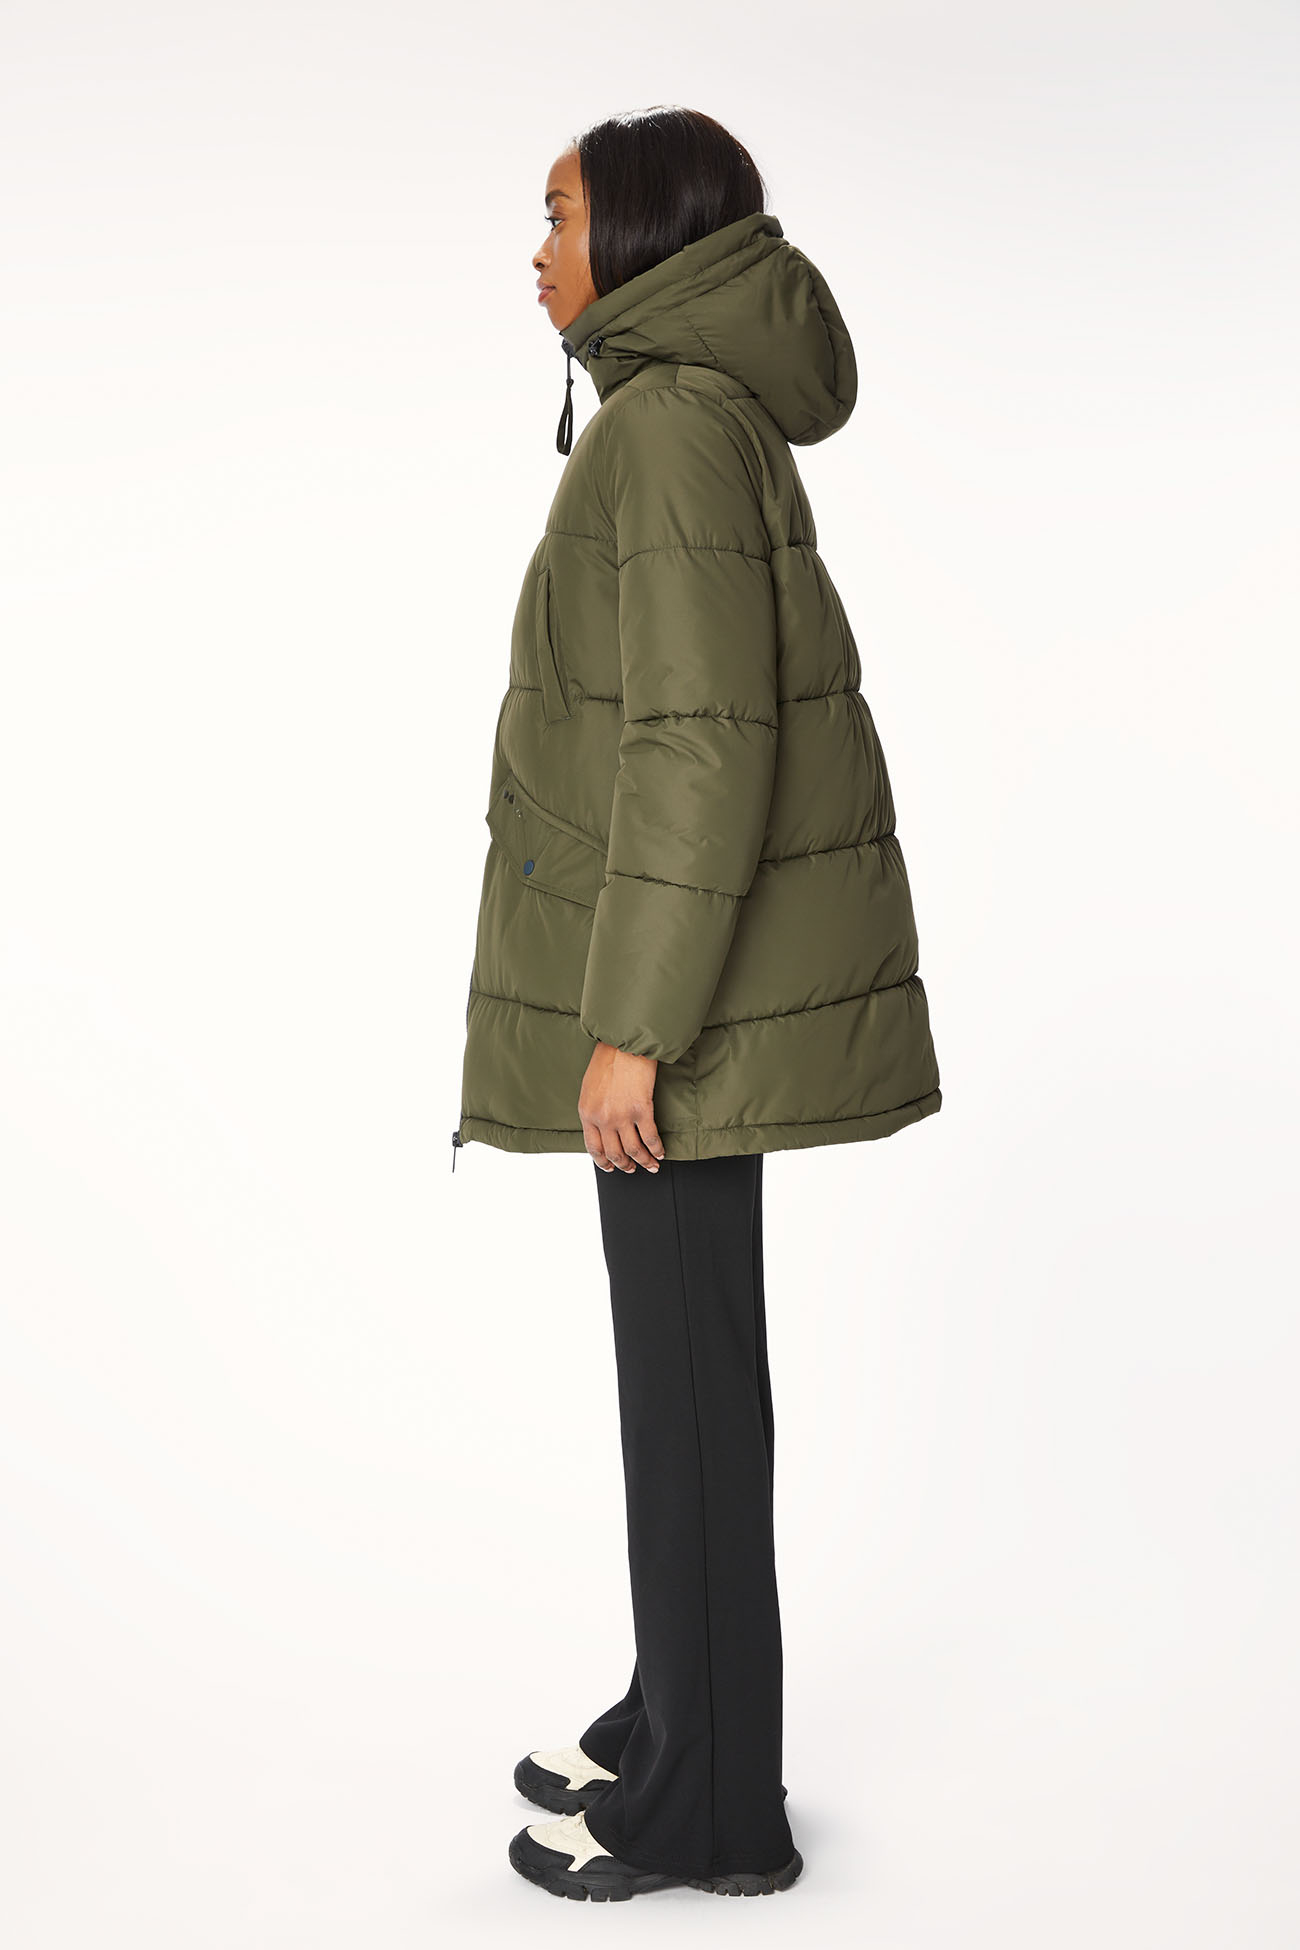 JACKET 9098 MADE IN WATER RESISTANT NYLON - MOSS GREEN - OOF WEAR